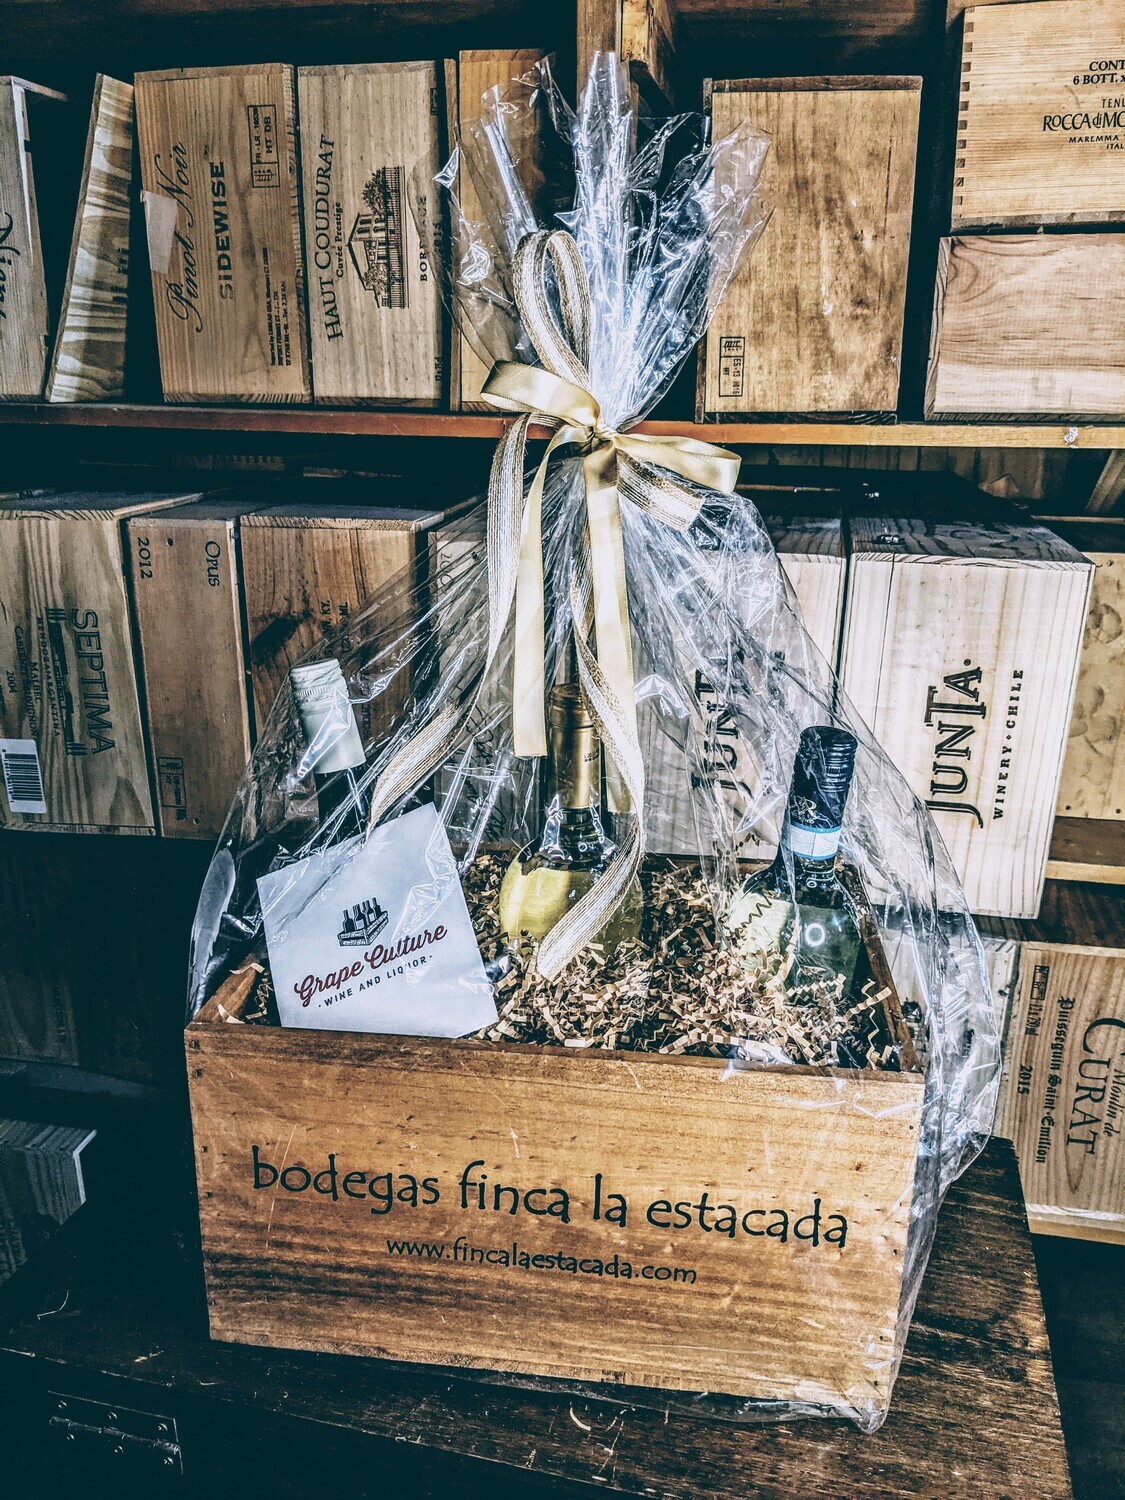 "White Wines of the World" Gift Basket